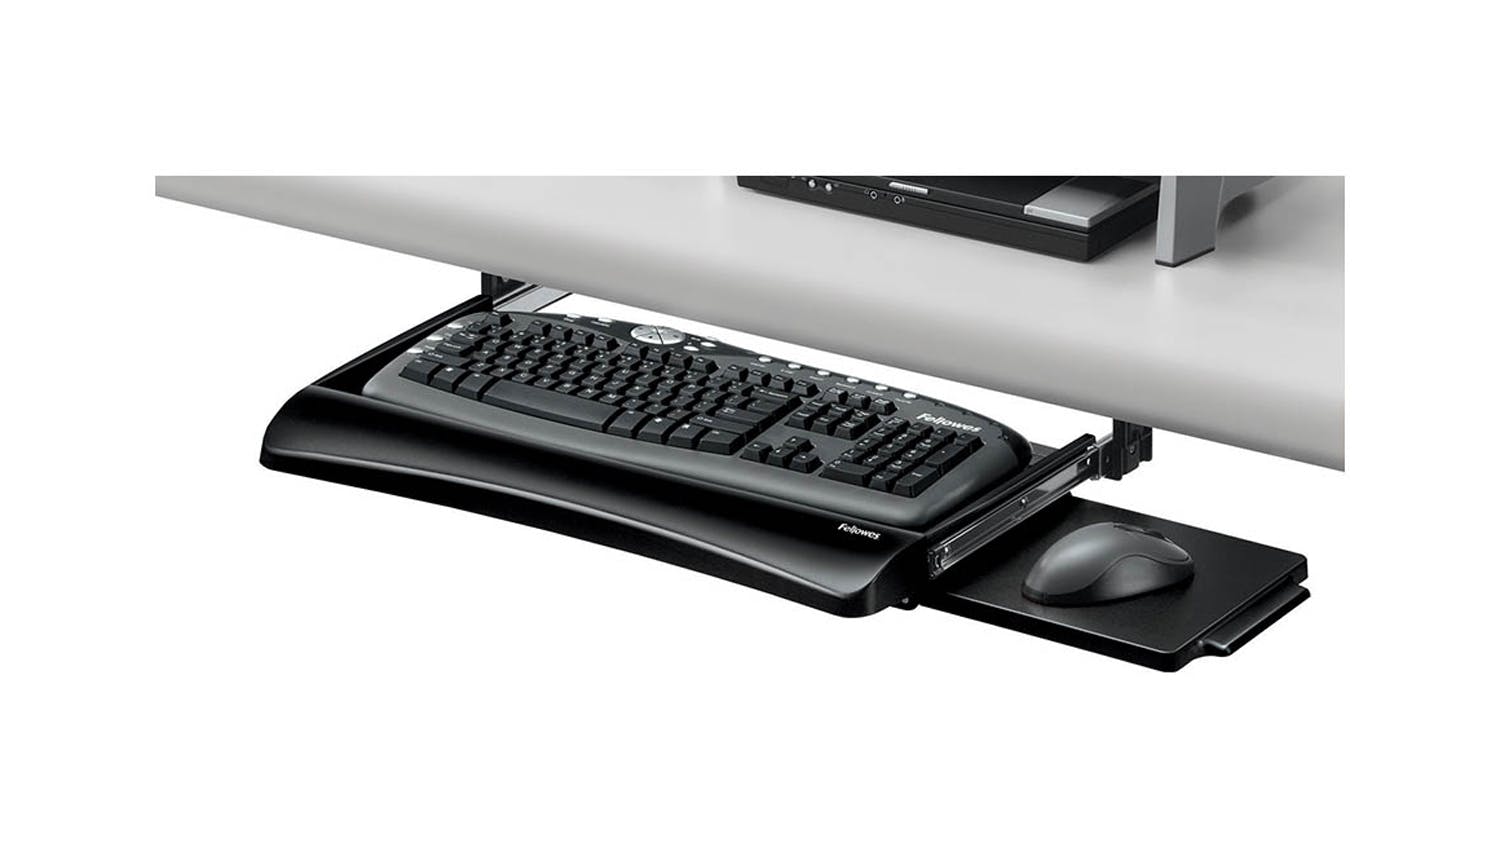 Fellowes Office Suites Keyboard Drawer